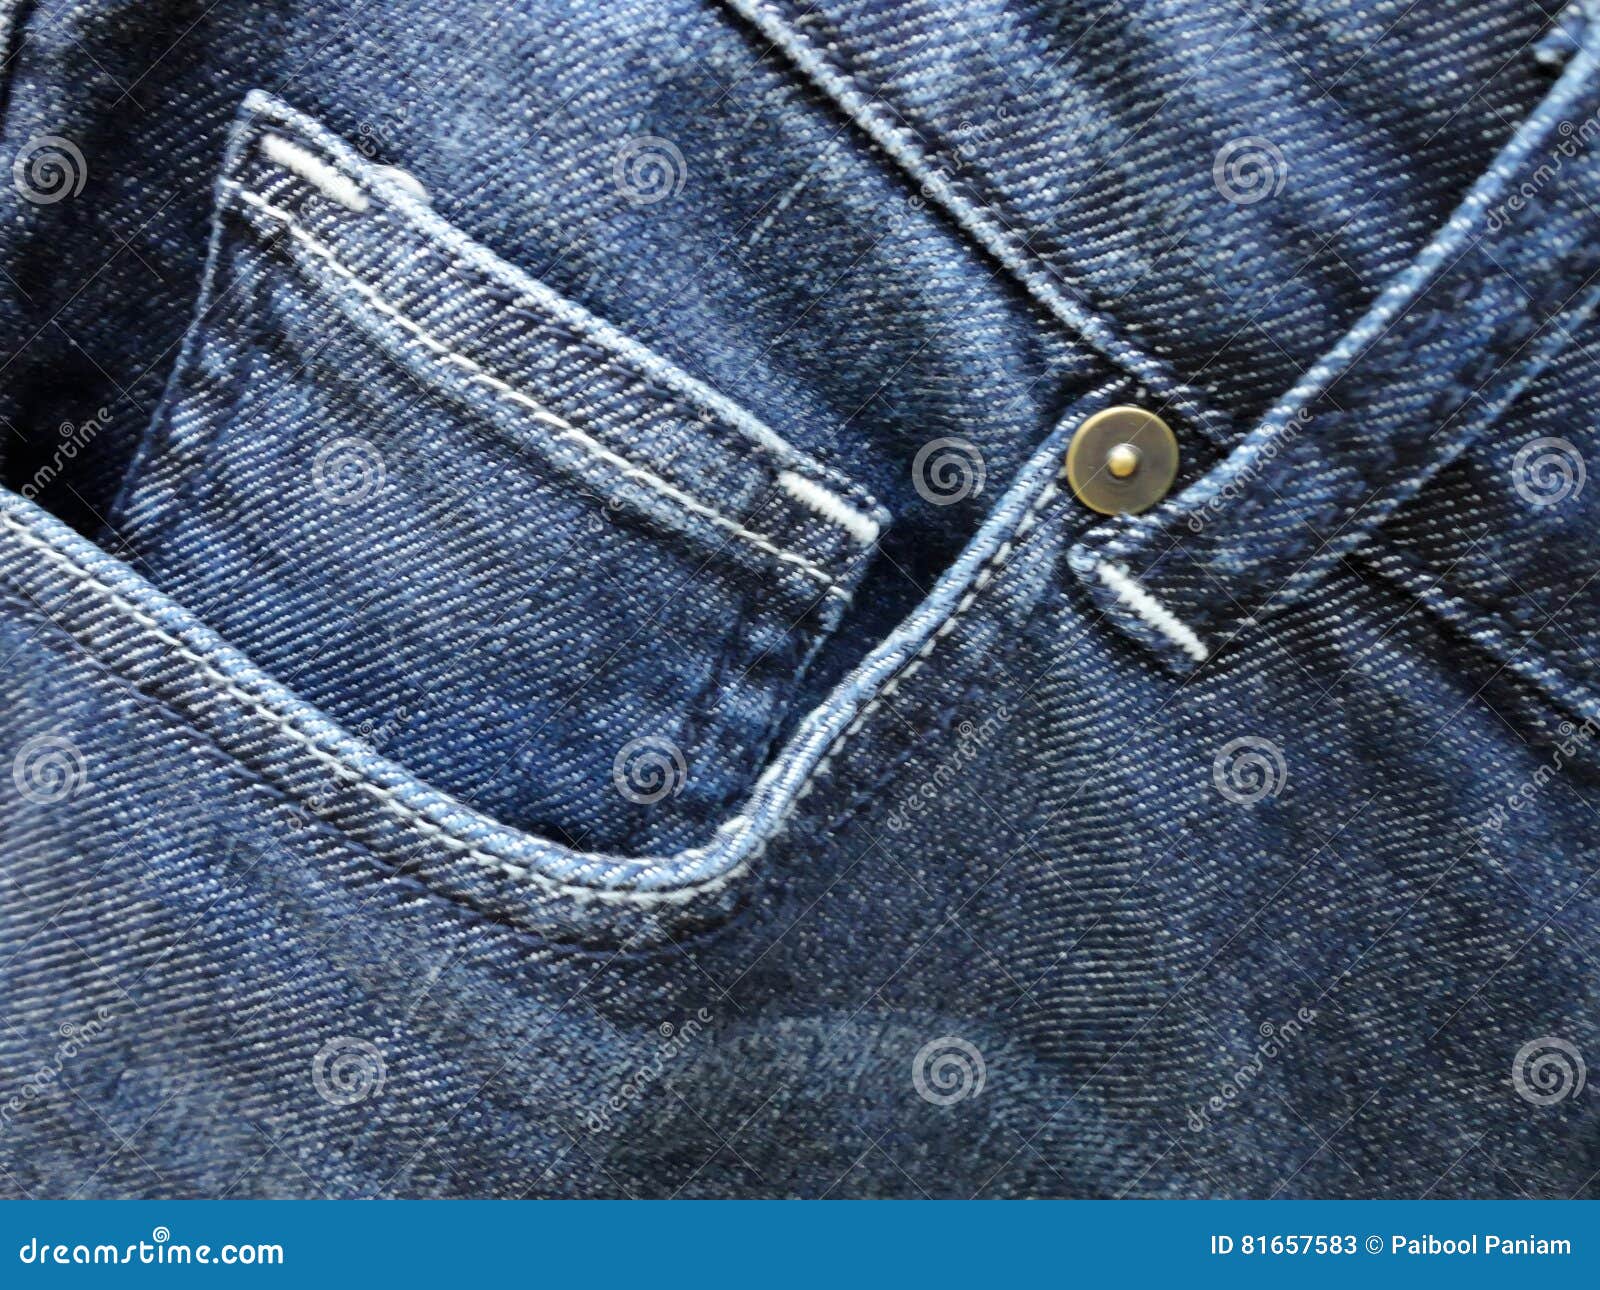 Fashion jeans stock image. Image of macro, garment, casual - 81657583